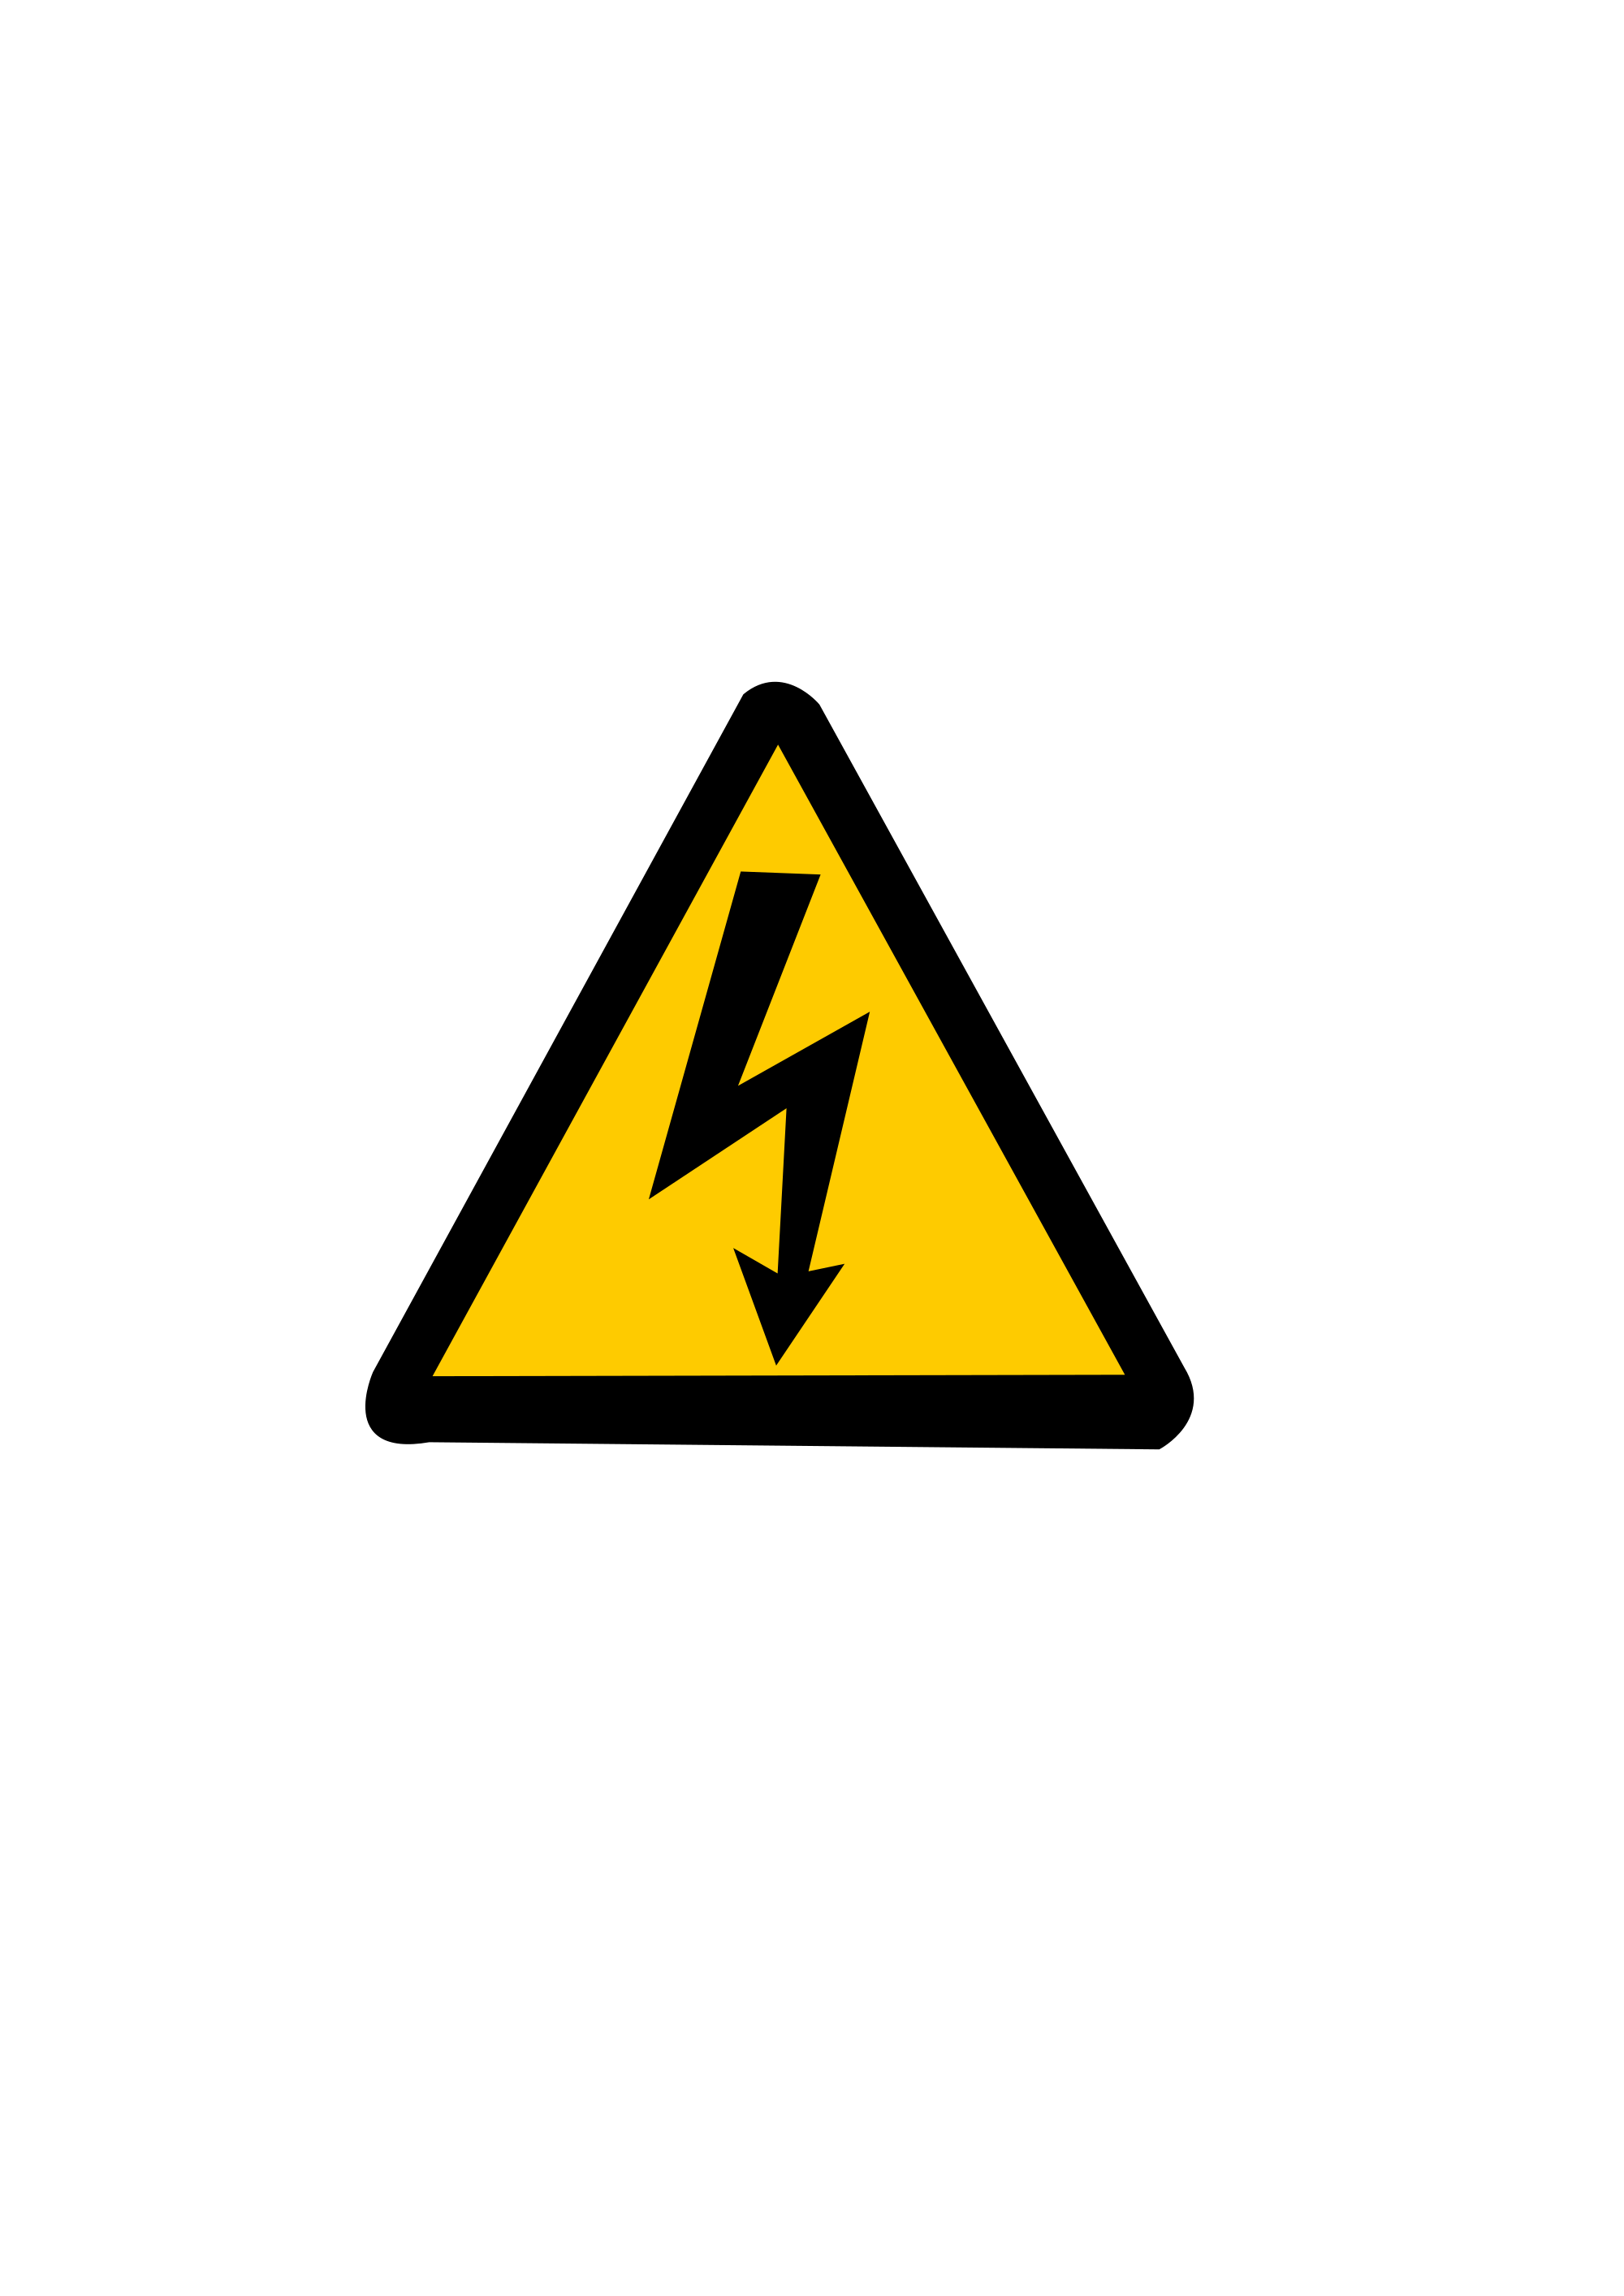 File:Electricity warning sign.svg - Wikimedia Commons